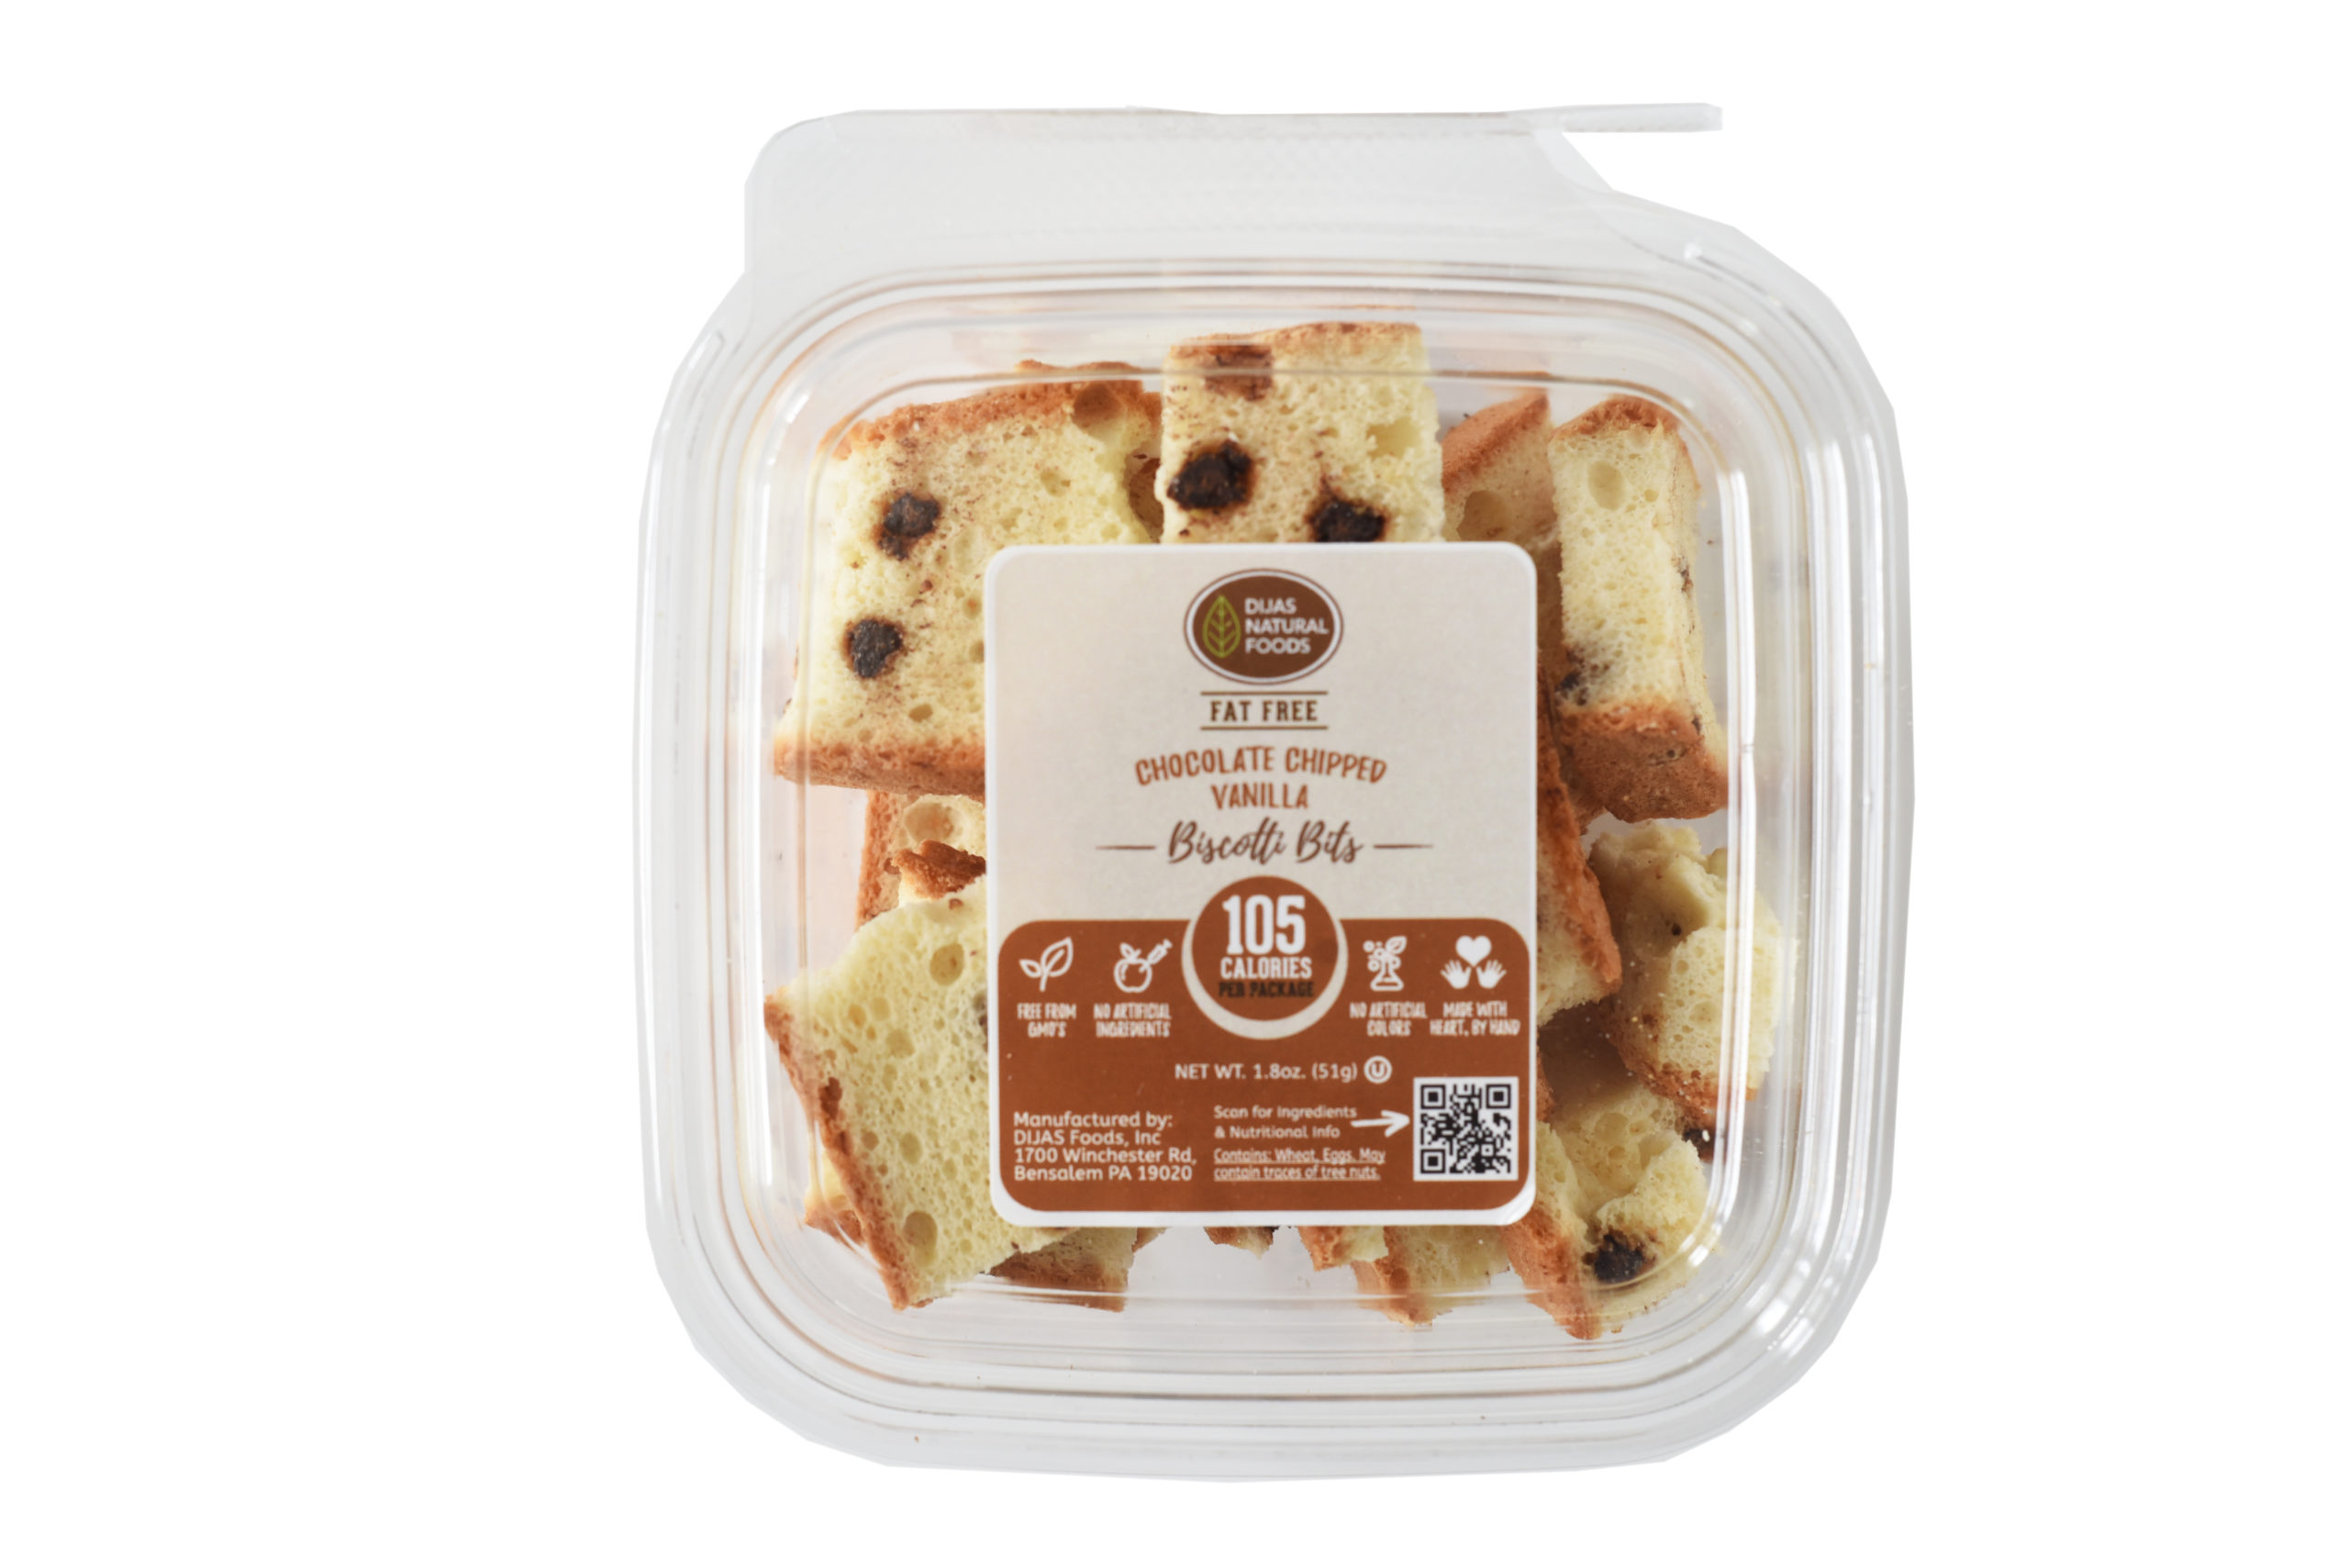 DIJAS Choc Chip Vanilla Biscotti Bits are a delicious low calorie and fat-free snack. We ship to Pennsylvania, New Jersey, New York, Delaware, Connecticut, Massachusetts, Florida, California, and more!